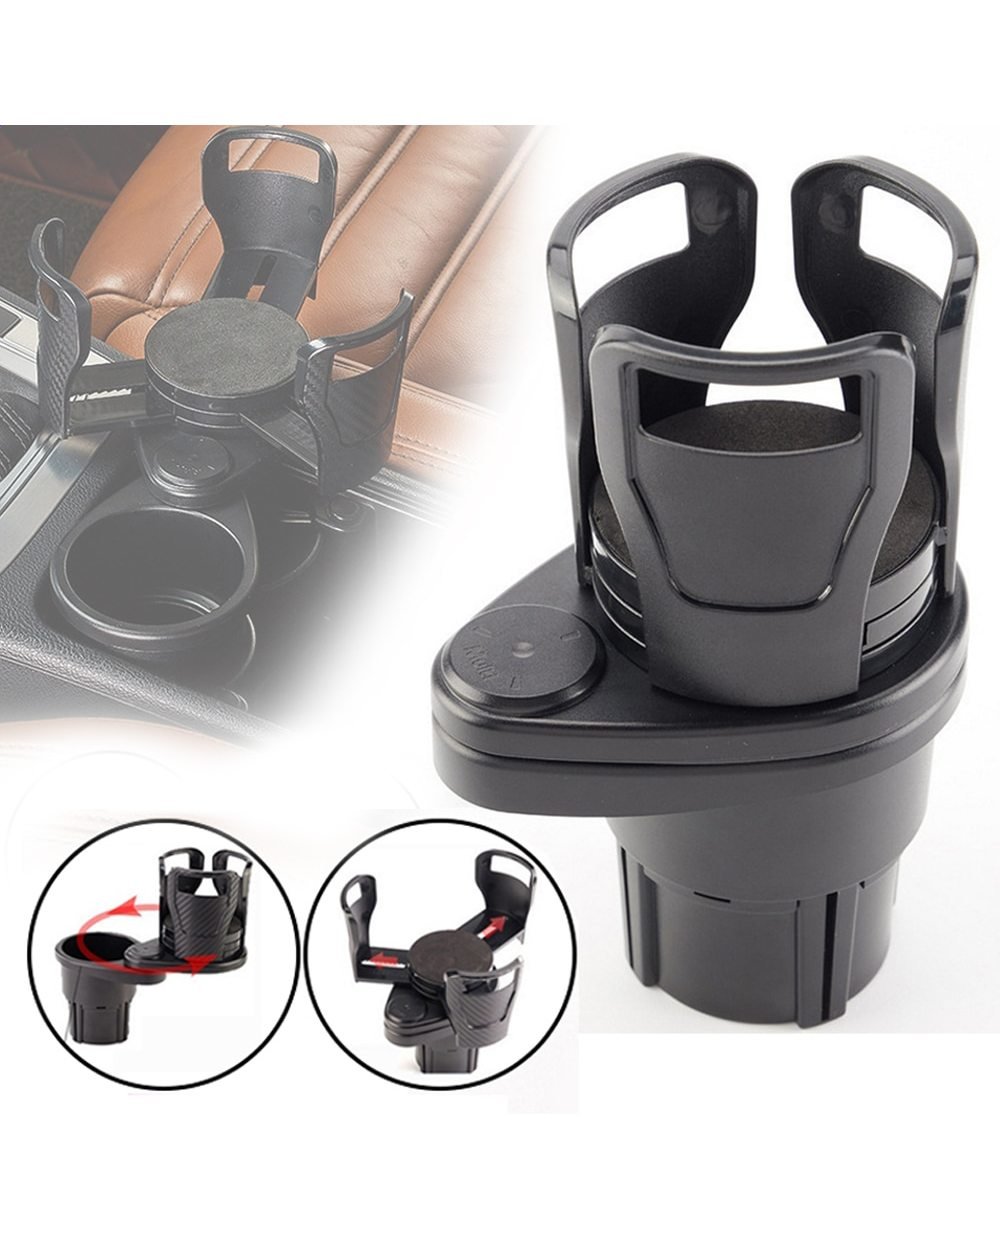 (Last Day Promotion🔥🔥)- All Purpose Car Cup Holder